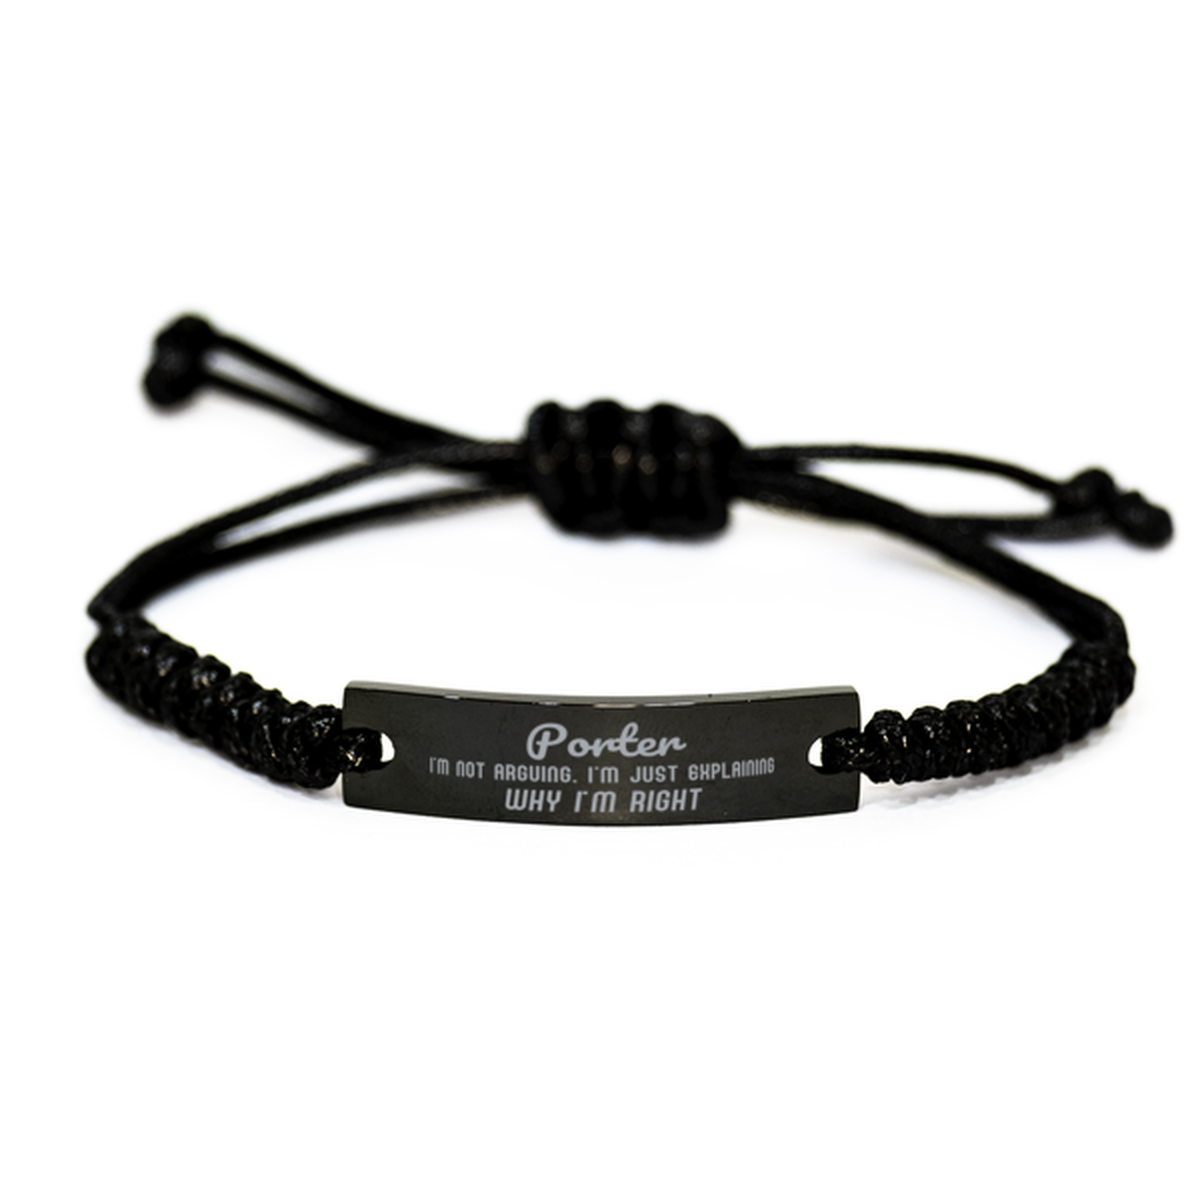 Porter I'm not Arguing. I'm Just Explaining Why I'm RIGHT Black Rope Bracelet, Funny Saying Quote Porter Gifts For Porter Graduation Birthday Christmas Gifts for Men Women Coworker